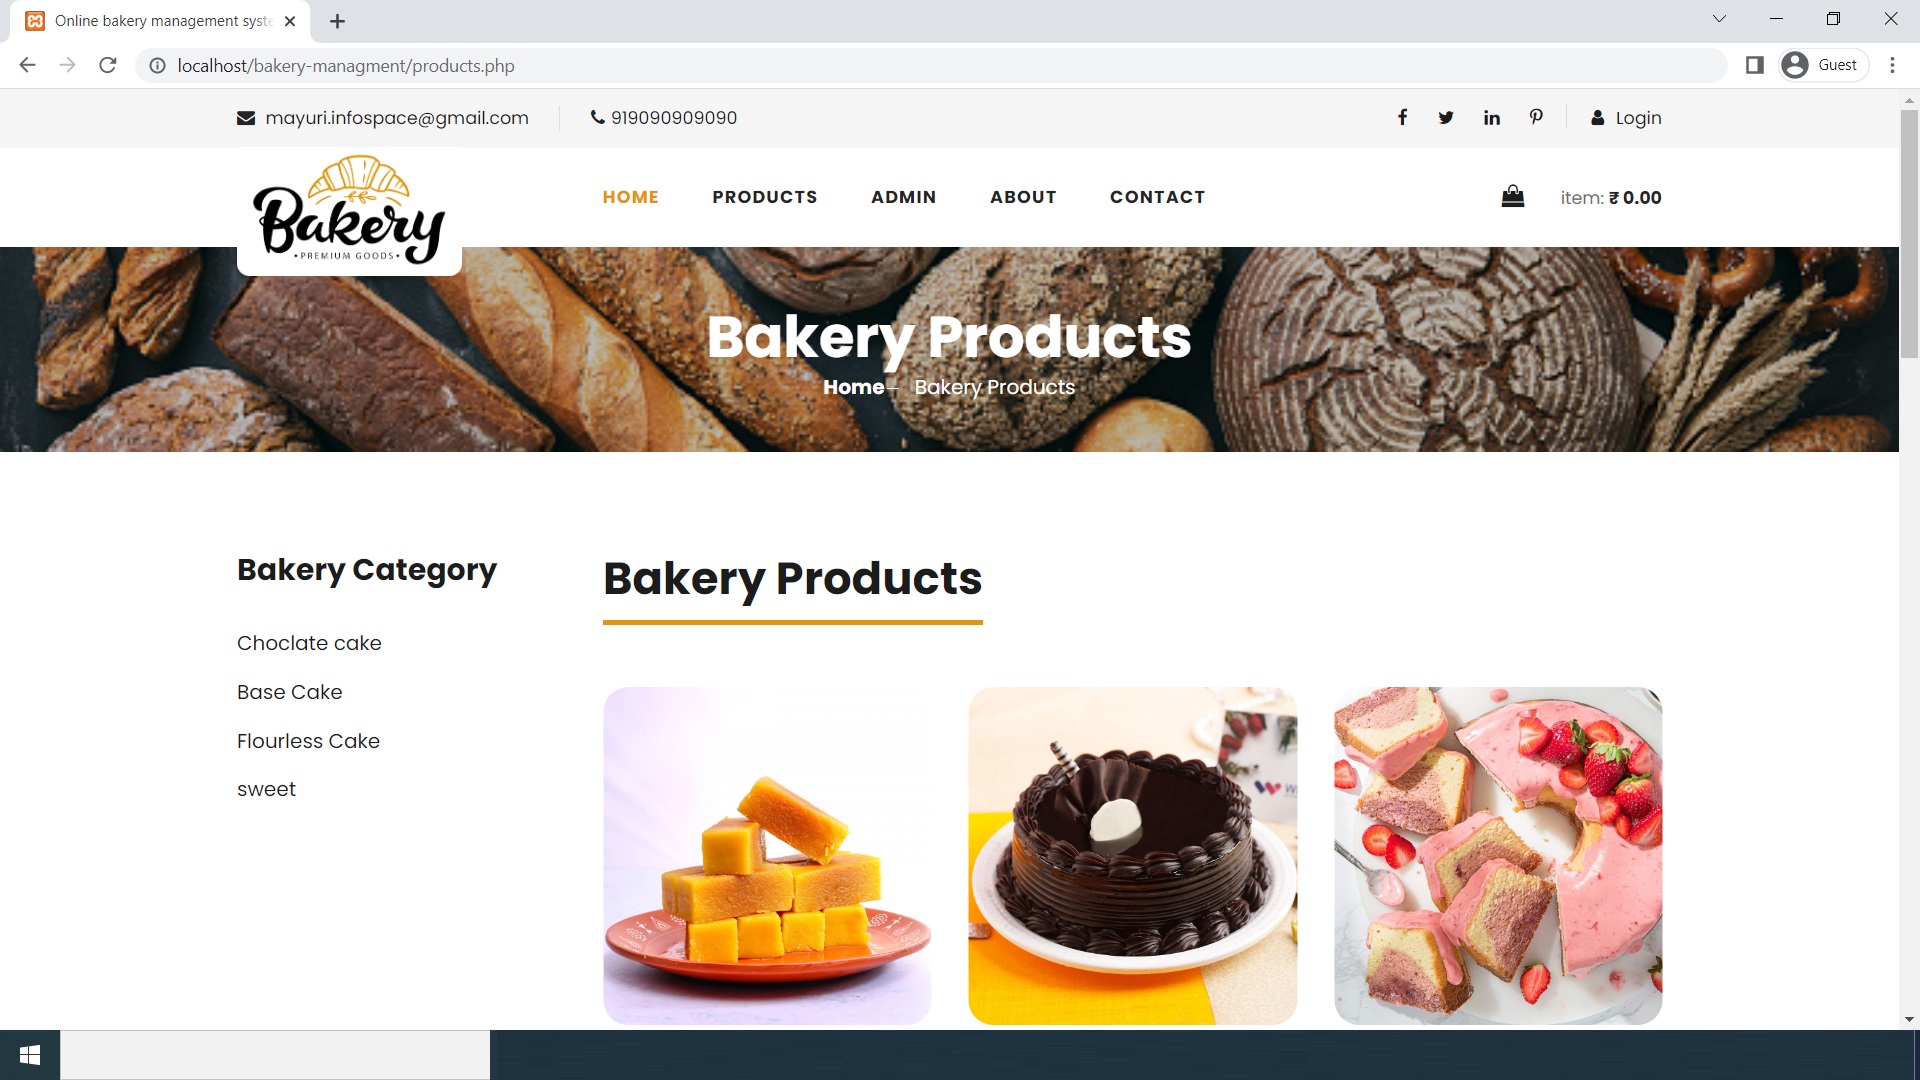  Online Bakery Management System Project In PHP